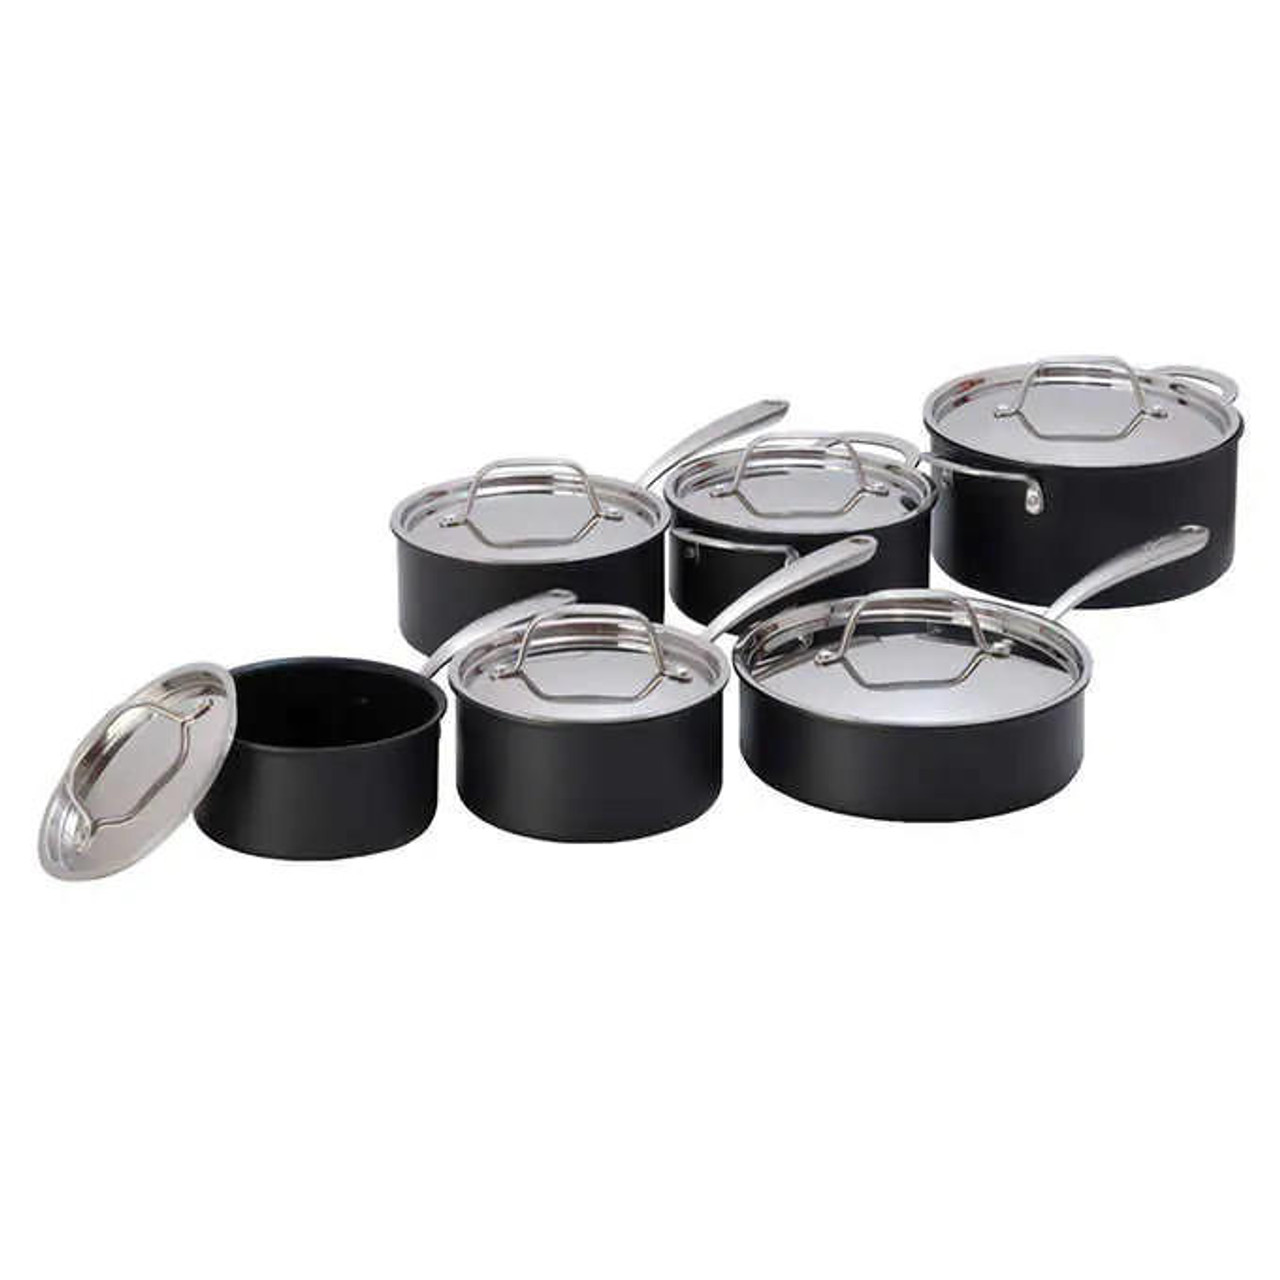 https://cdn11.bigcommerce.com/s-g5ygv2at8j/images/stencil/1280x1280/products/13658/31441/a2zchef-lagostina-hard-anodized-cookware-set-12-piece__45765.1692707781.jpg?c=1